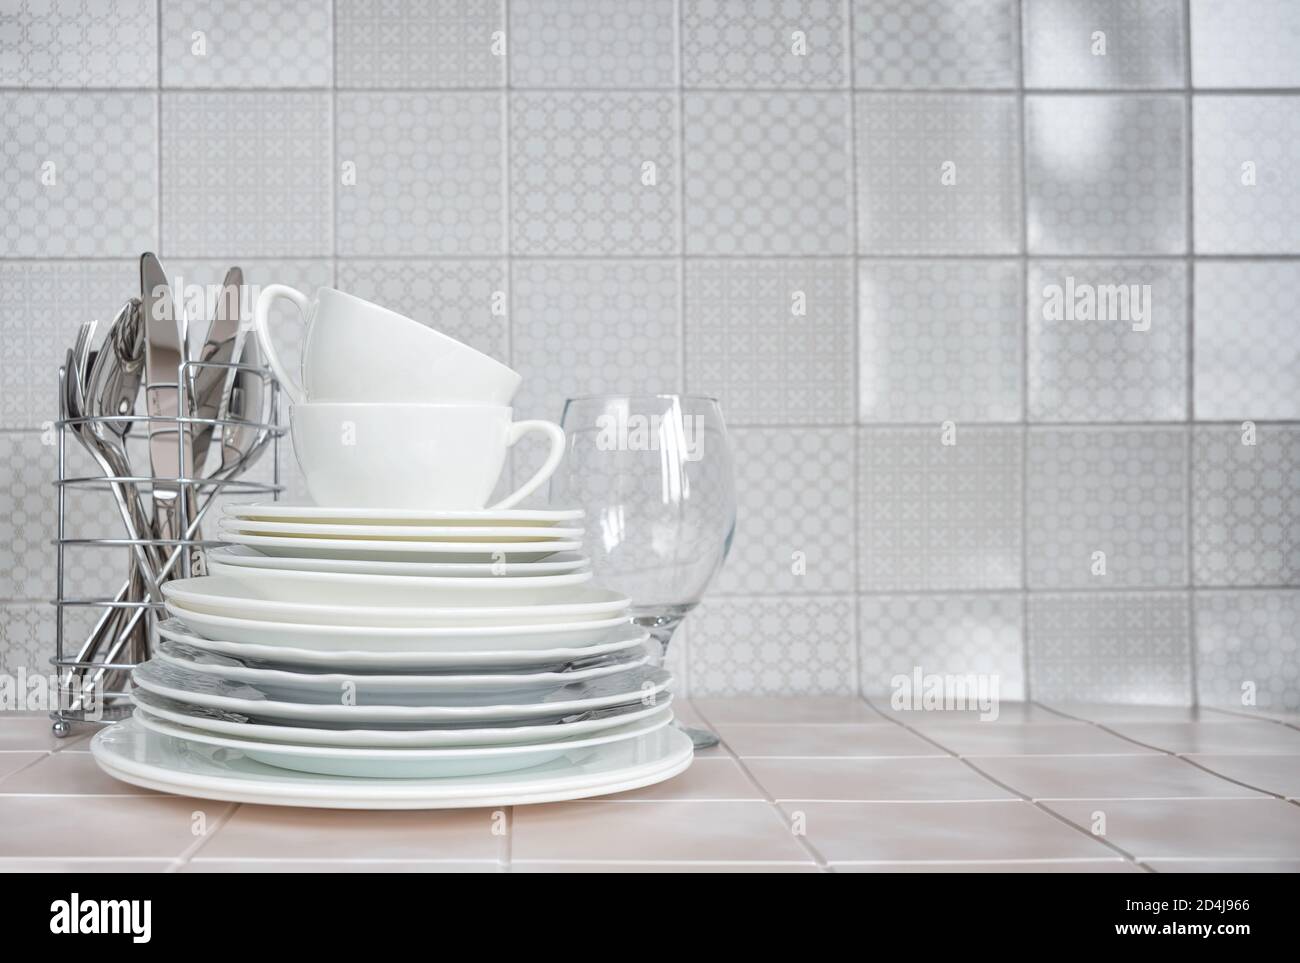 Stack of white porcelain plates, tea cups, a wine glass, as well as spoons and forks in the stand for dishes on the kitchen table against the backgrou Stock Photo